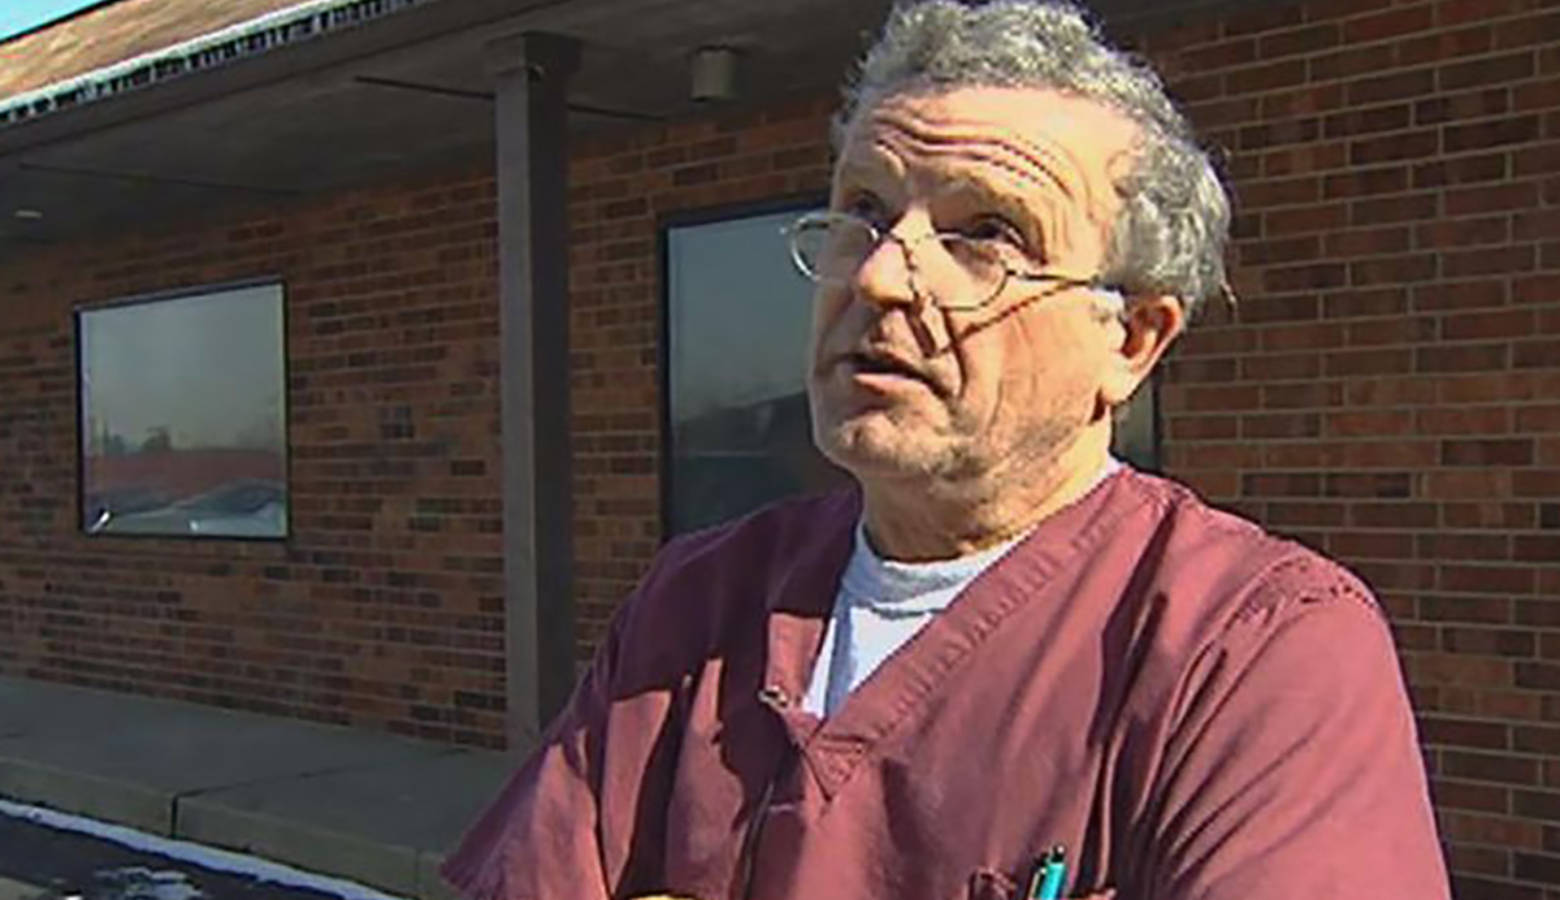 Ulrich Klopfer during a Dec. 1, 2015 interview with WNDU-TV in South Bend. After his death on Sept. 3. and his family discovered thousands of fetal remains on his property. (Courtesy of WNDU-TV)